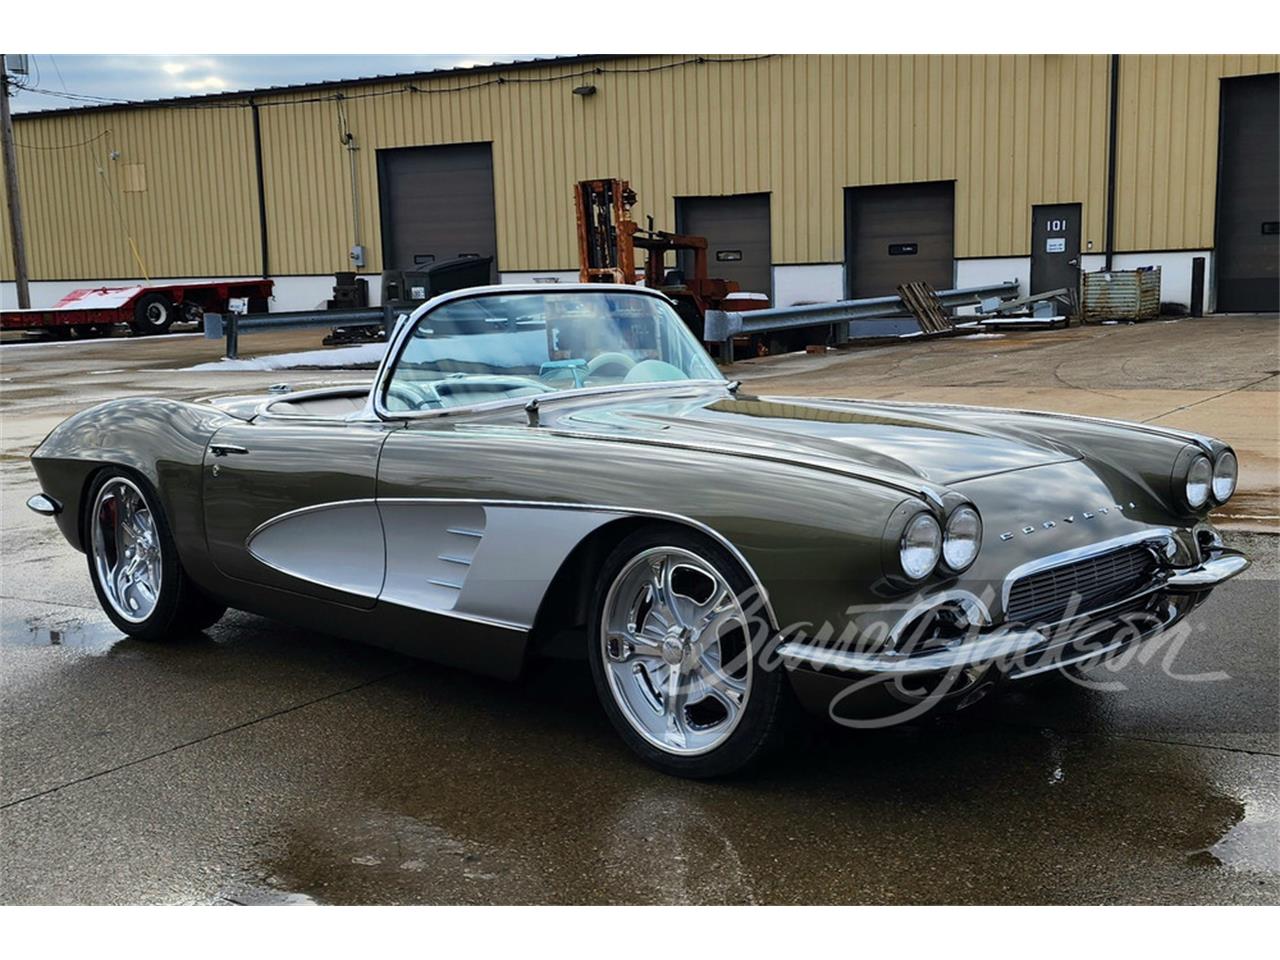 For Sale at Auction: 1961 Chevrolet Corvette in Scottsdale, Arizona for sale in Scottsdale, AZ